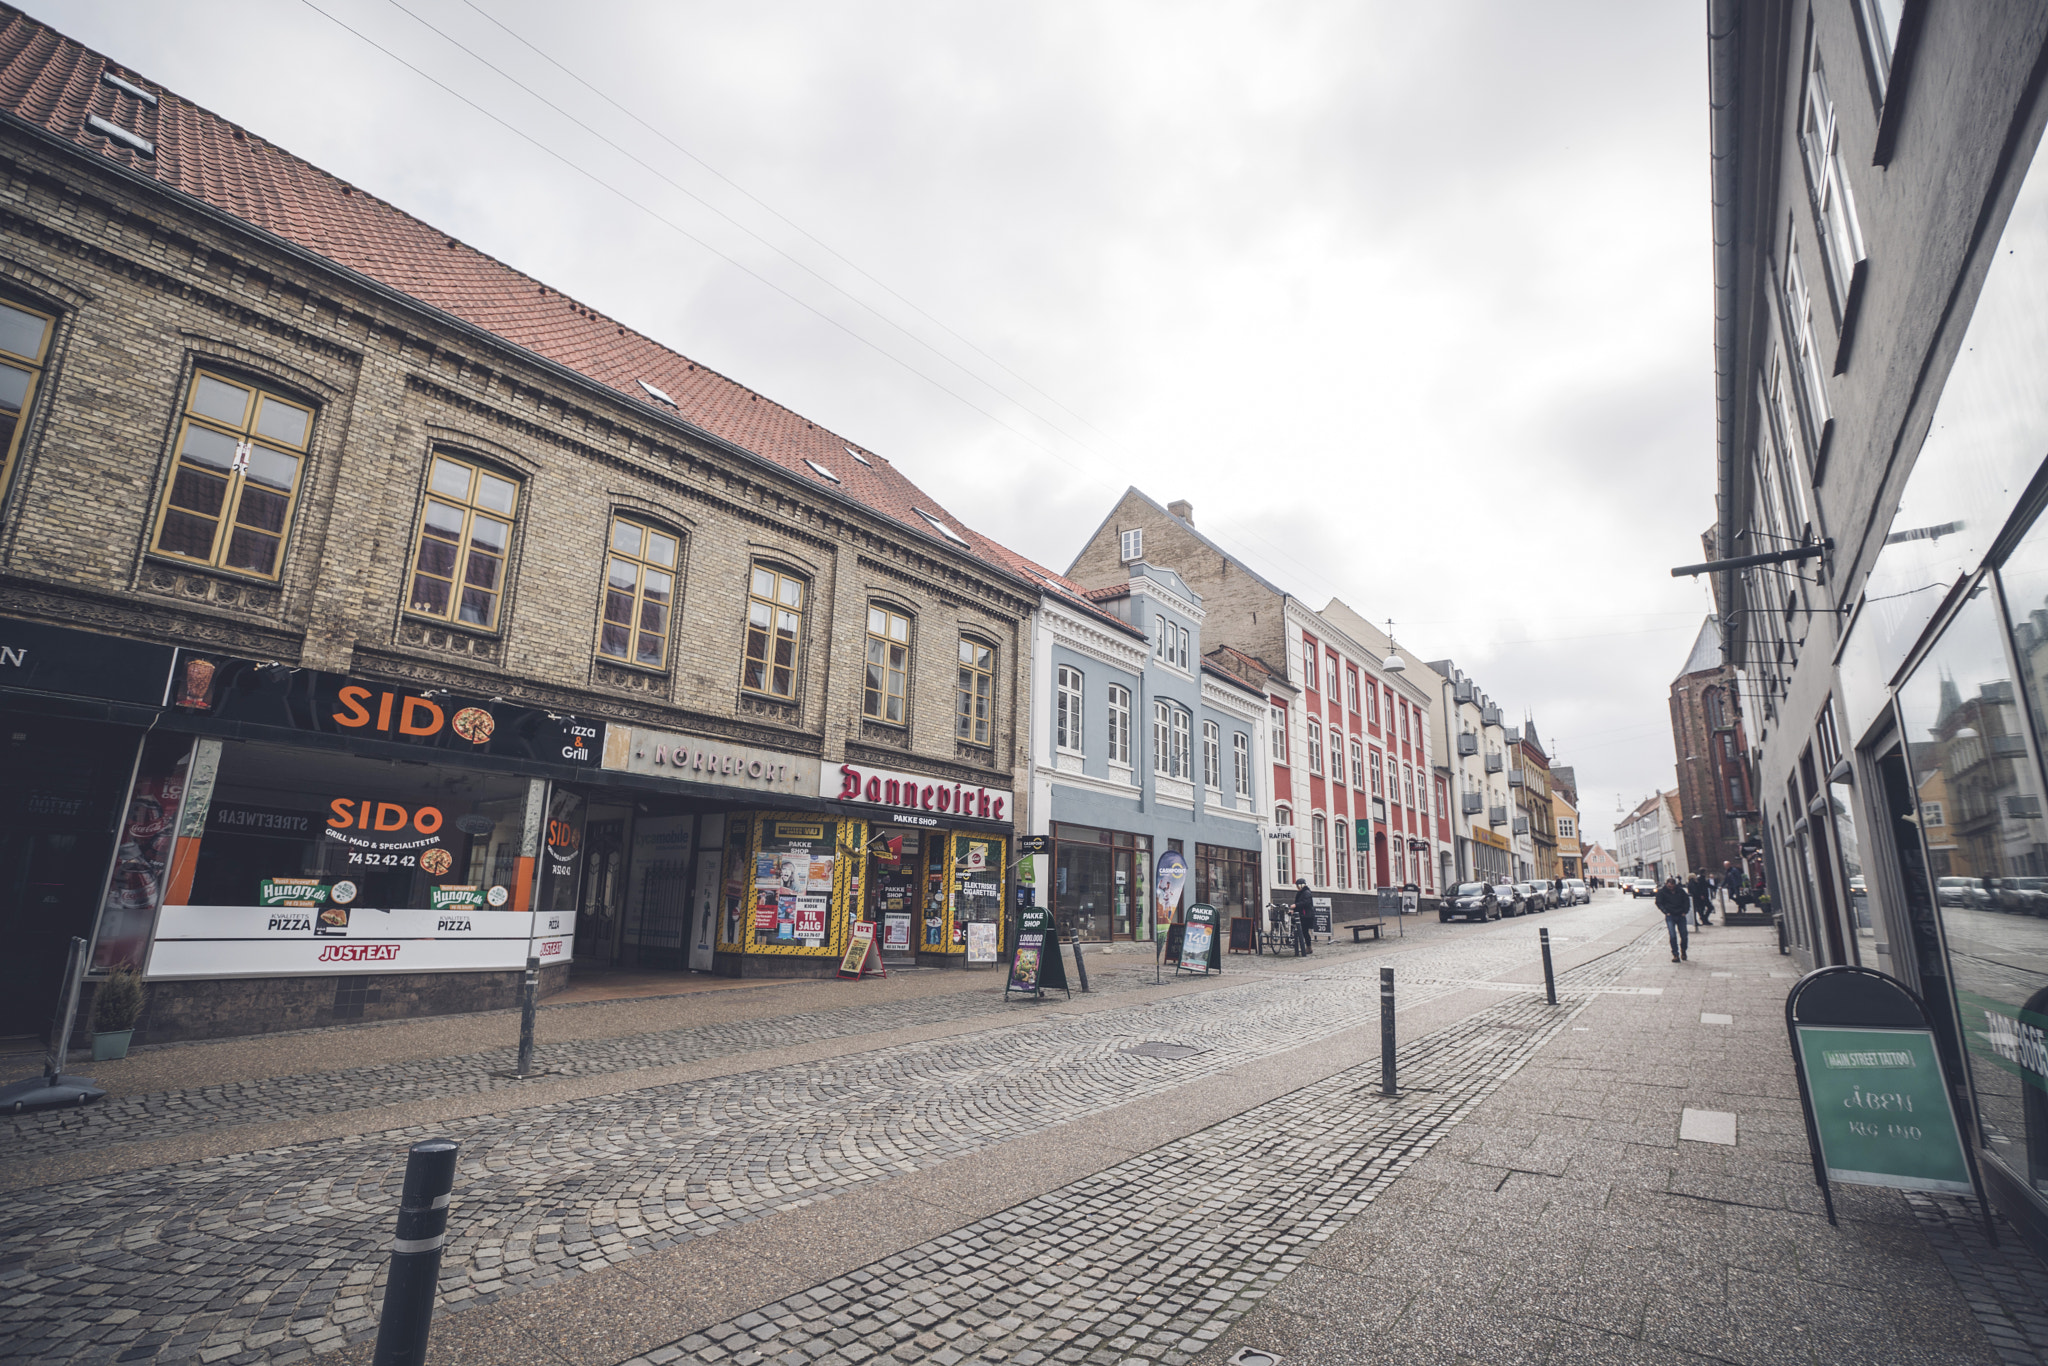 Sony a99 II sample photo. Downtown square in haderslev city in denmark photography